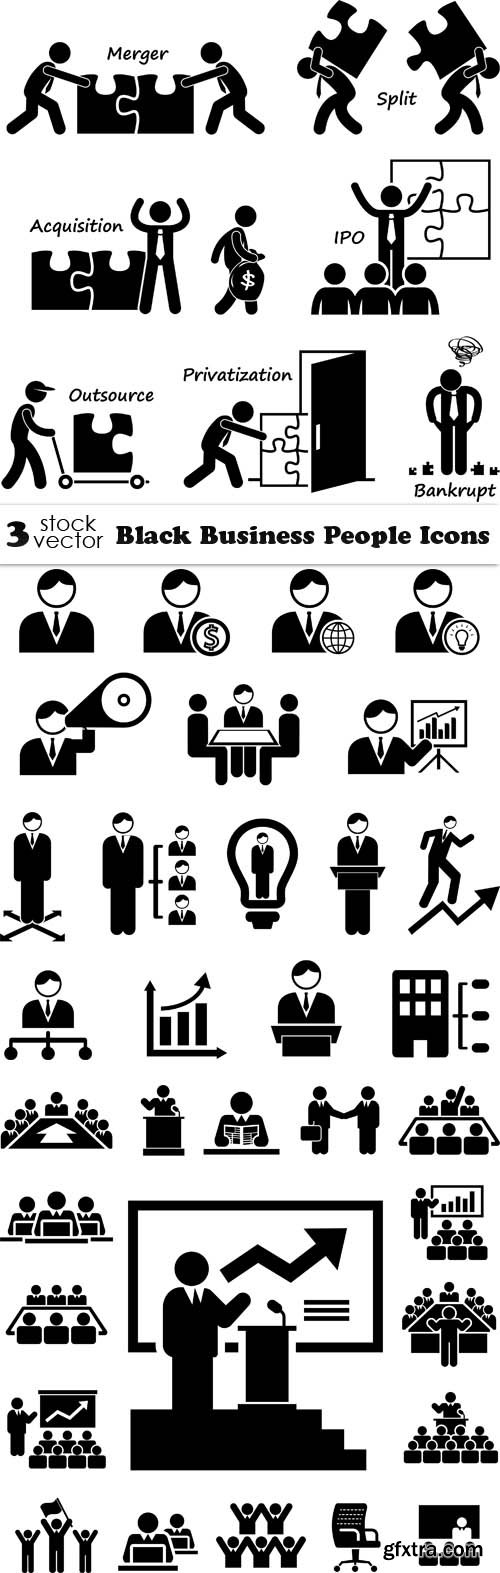 Vectors - Black Business People Icons